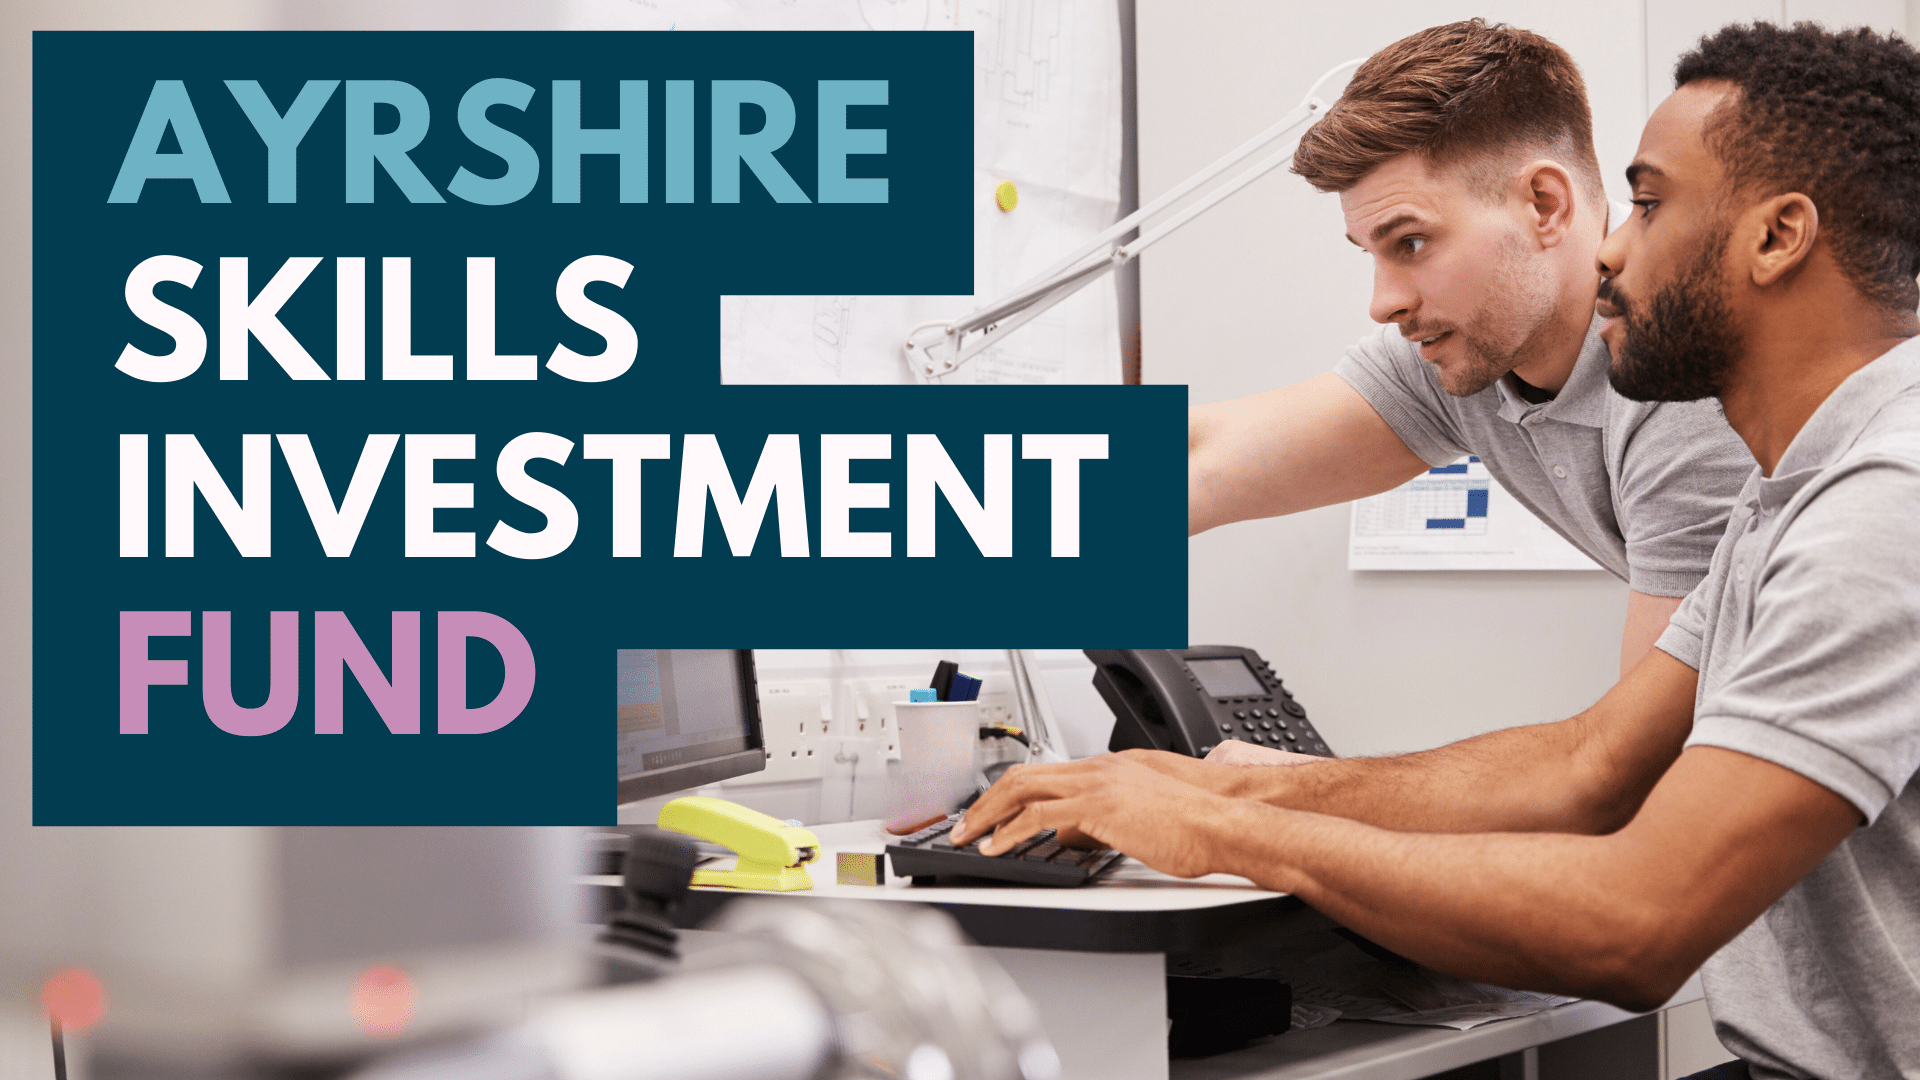 Image showing one employee training another with overlay text "Ayrshire Skills Investment Fund"